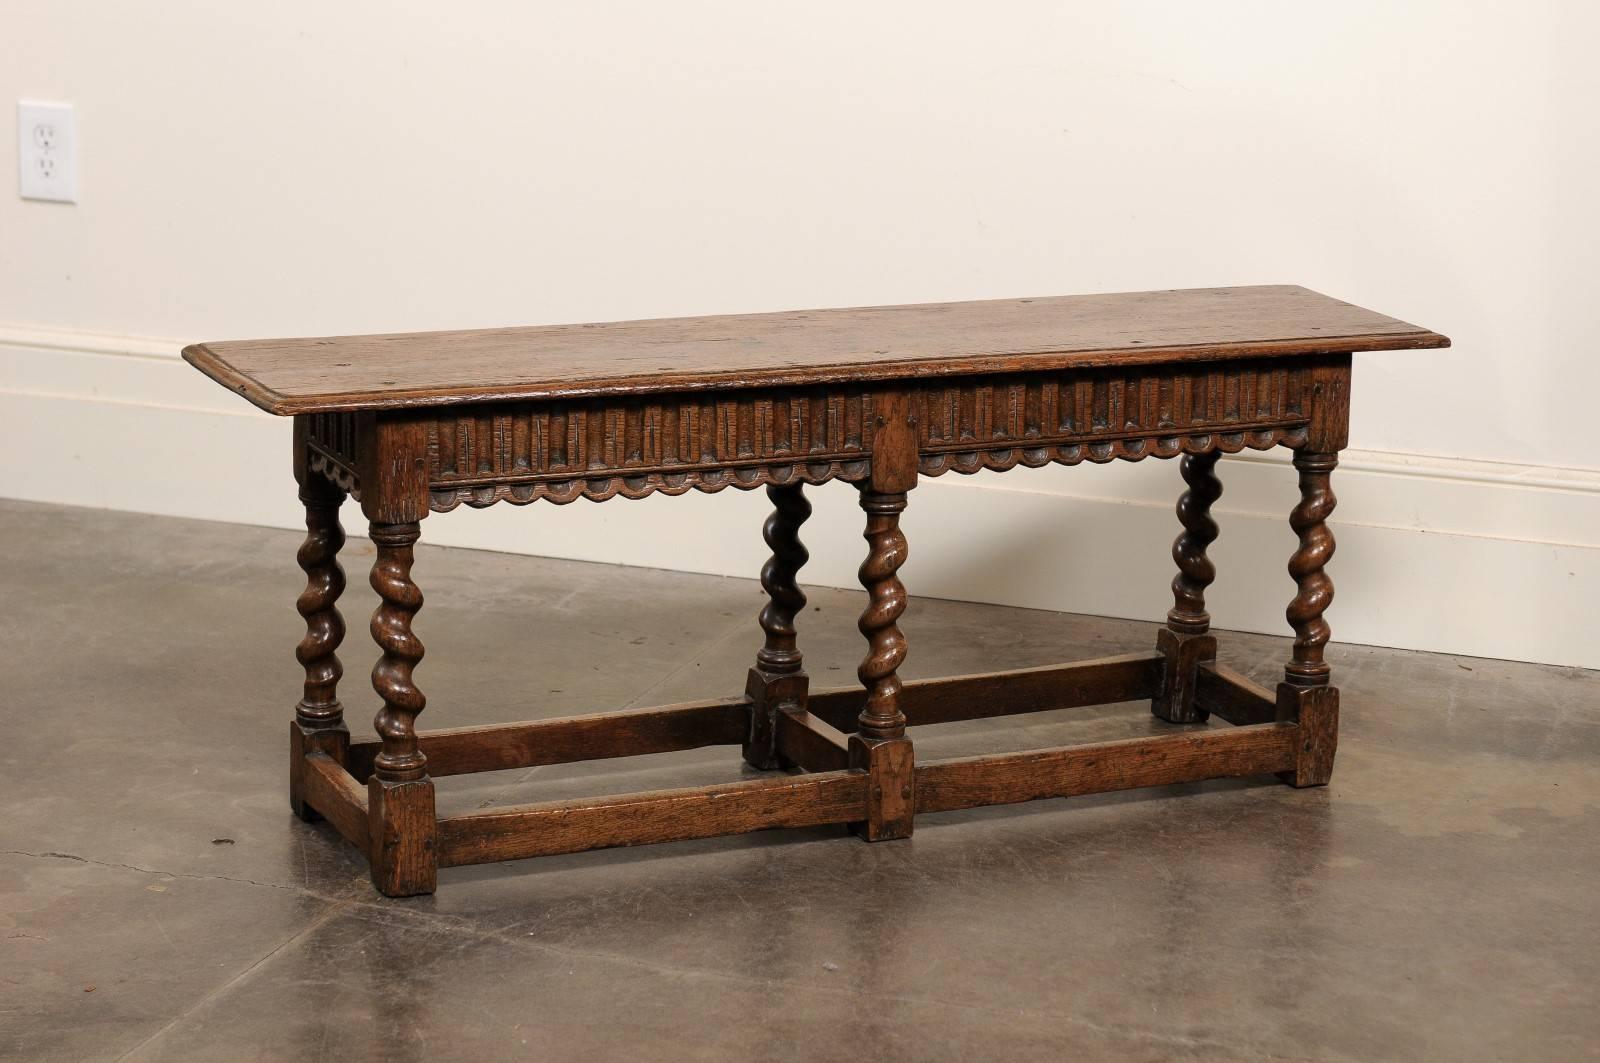 This English carved oak backless bench from the early 20th century features a rectangular wooden seat with beveled edges over a nicely carved seat rail. Six stylish barley twist legs support the ensemble and are connected to one another by side